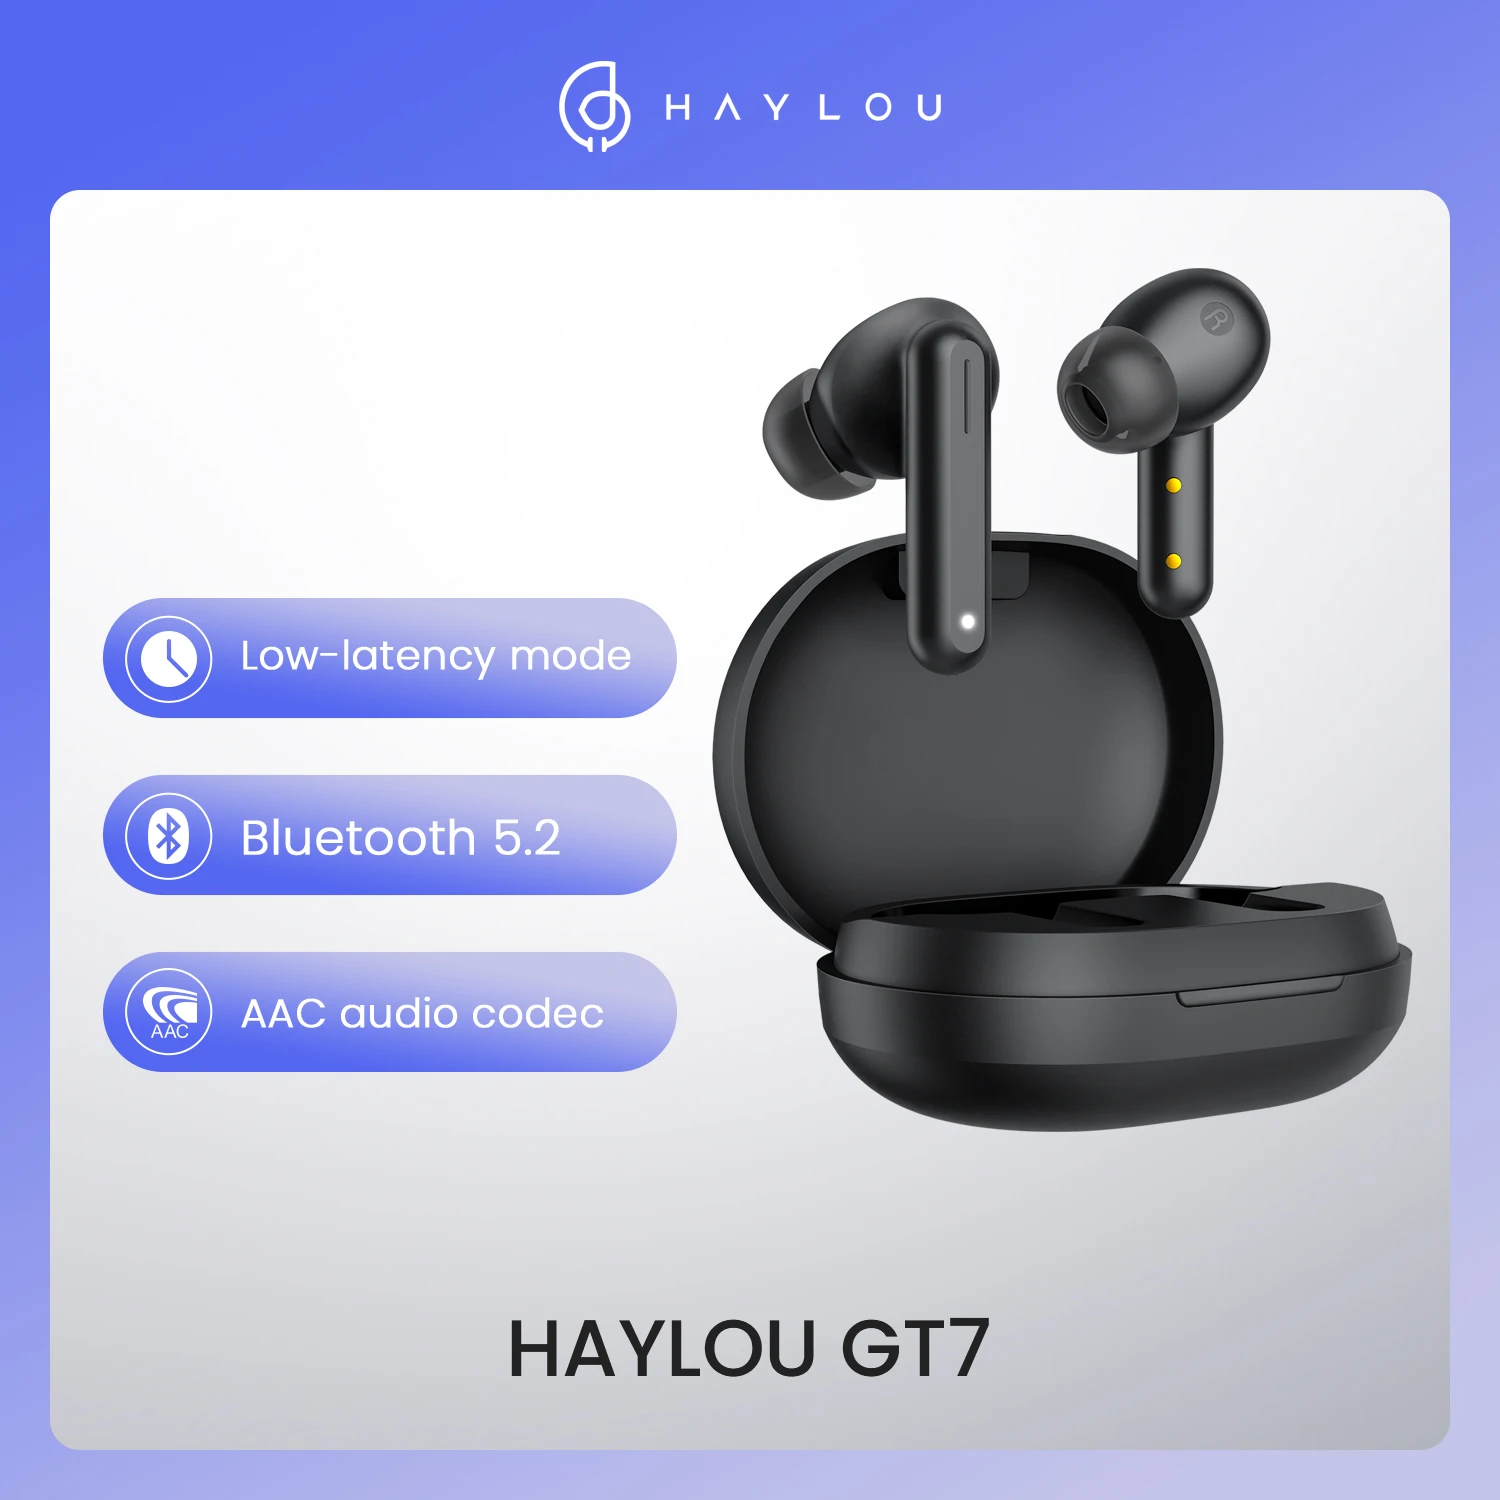 Haylou GT7 TWS wireless earphones black fone Bluetooth 5.2 AAC gamer headphones call noise cancellation Low-latency headset